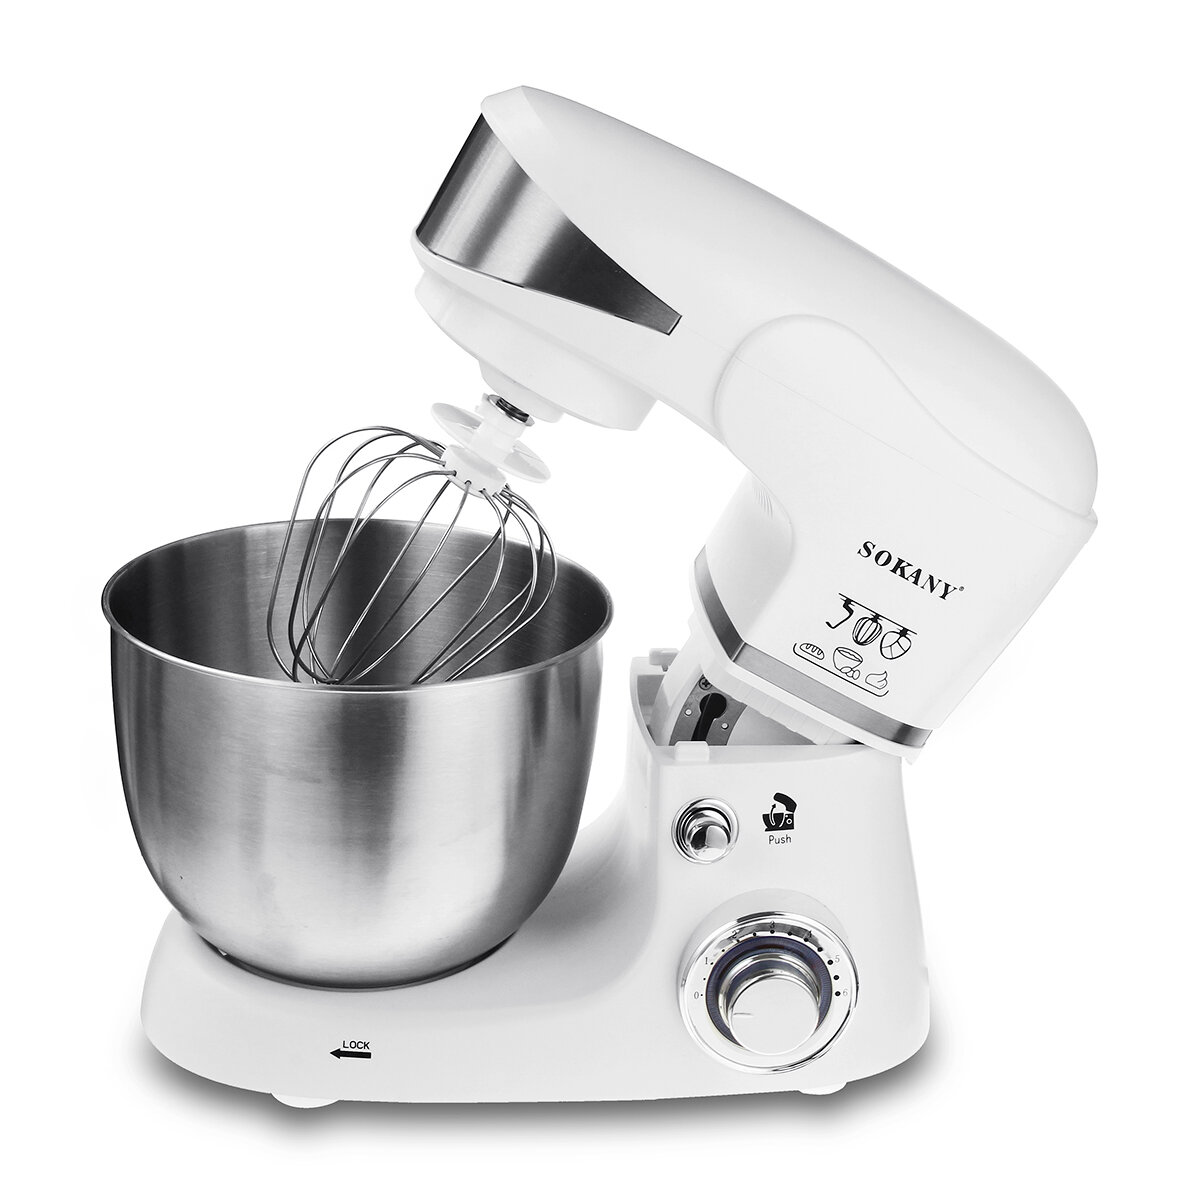 Sokany 220-240v 1000w 5l electric food stand mixer dough hook whip beater  whisk Sale - Banggood.com